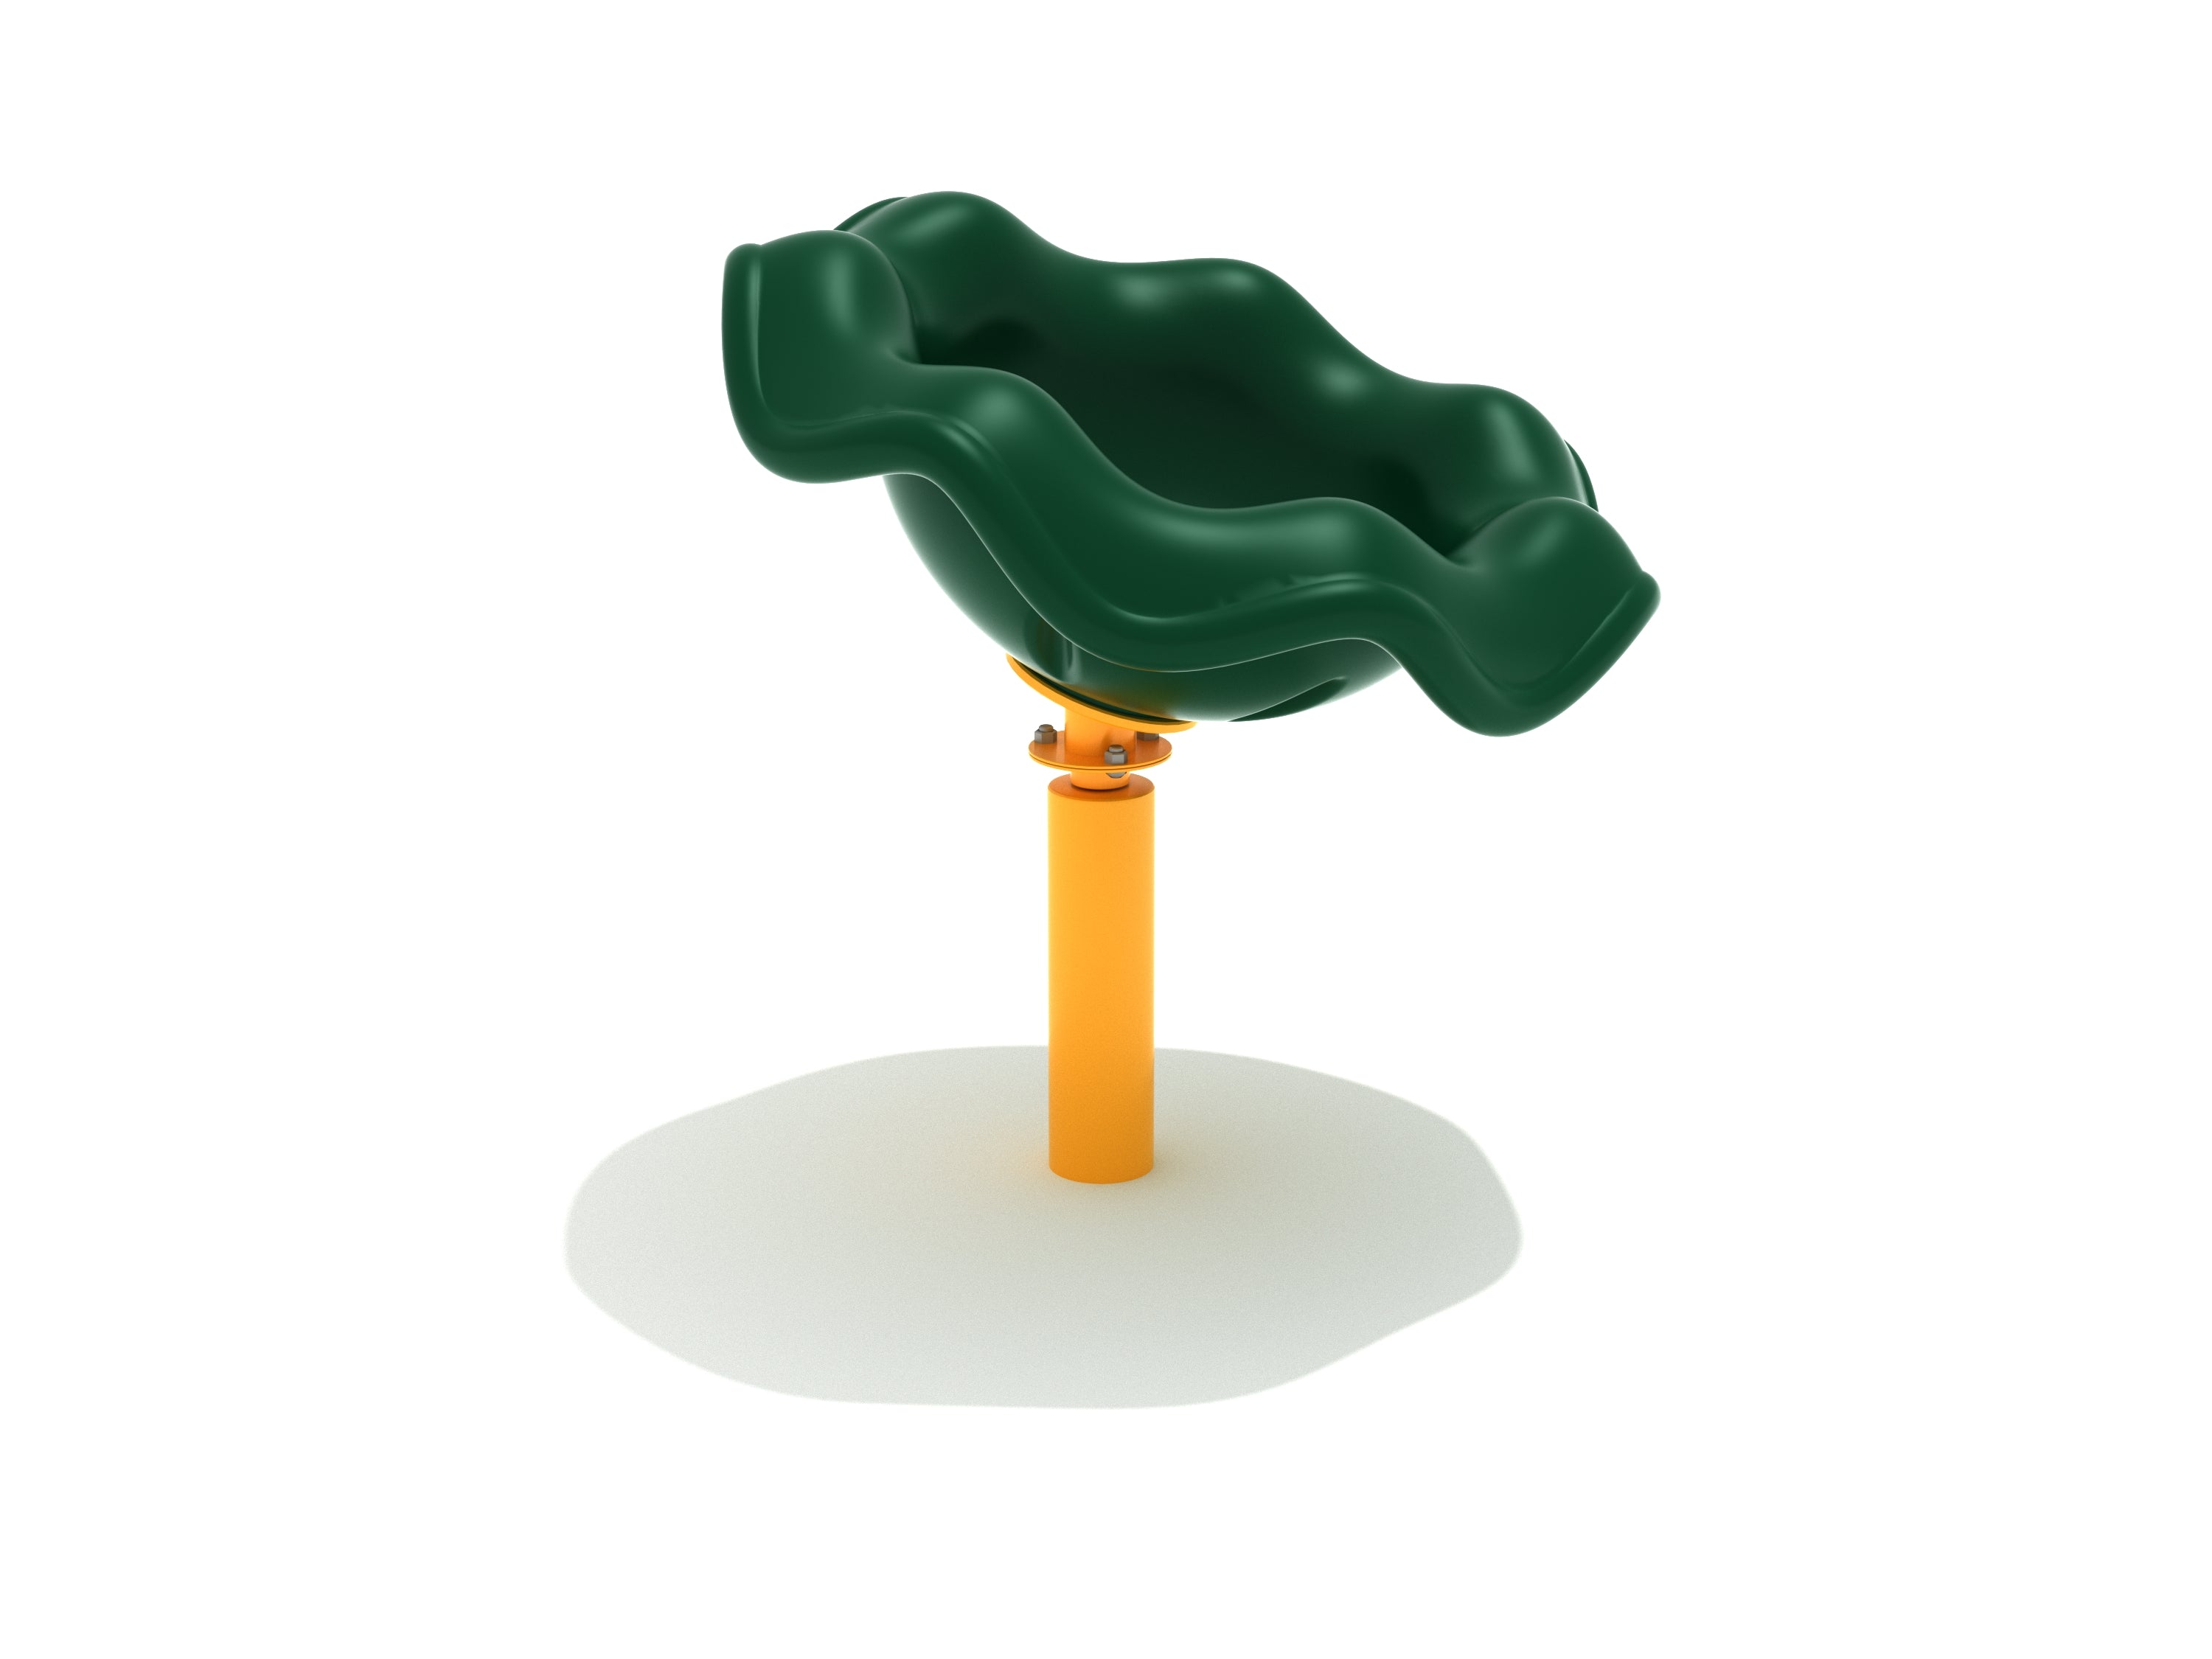 Sit N Spin Freestanding Play Event | Rainforest Green and Sunglow Yellow